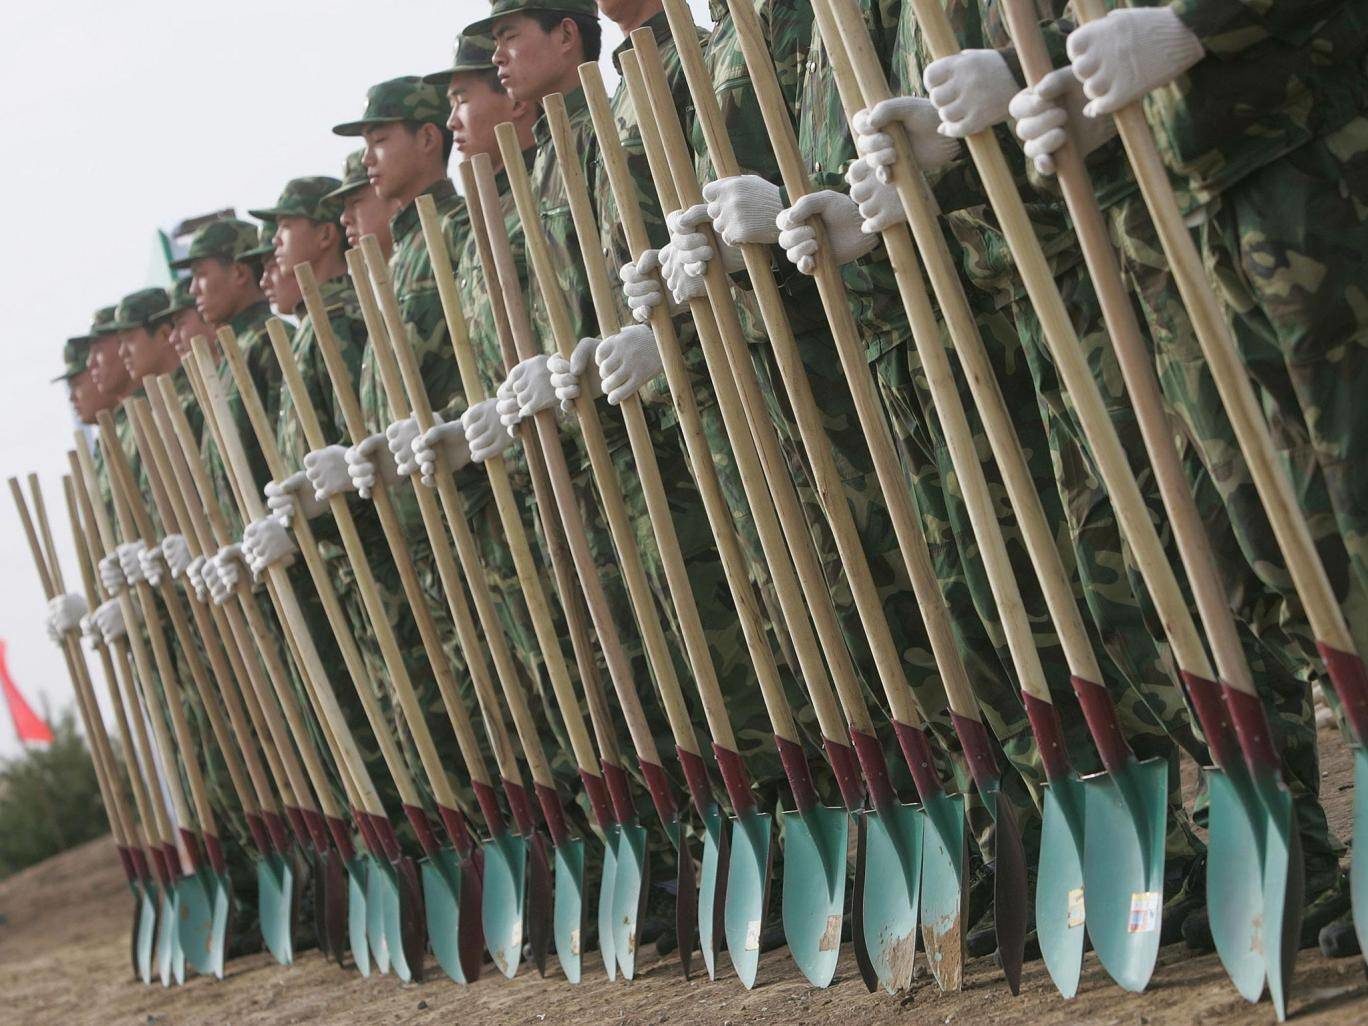 A large regiment of the People's Liberation Army, along with some of the nation's armed police force, have been withdrawn from their posts to work non-military tasks, such as planting trees